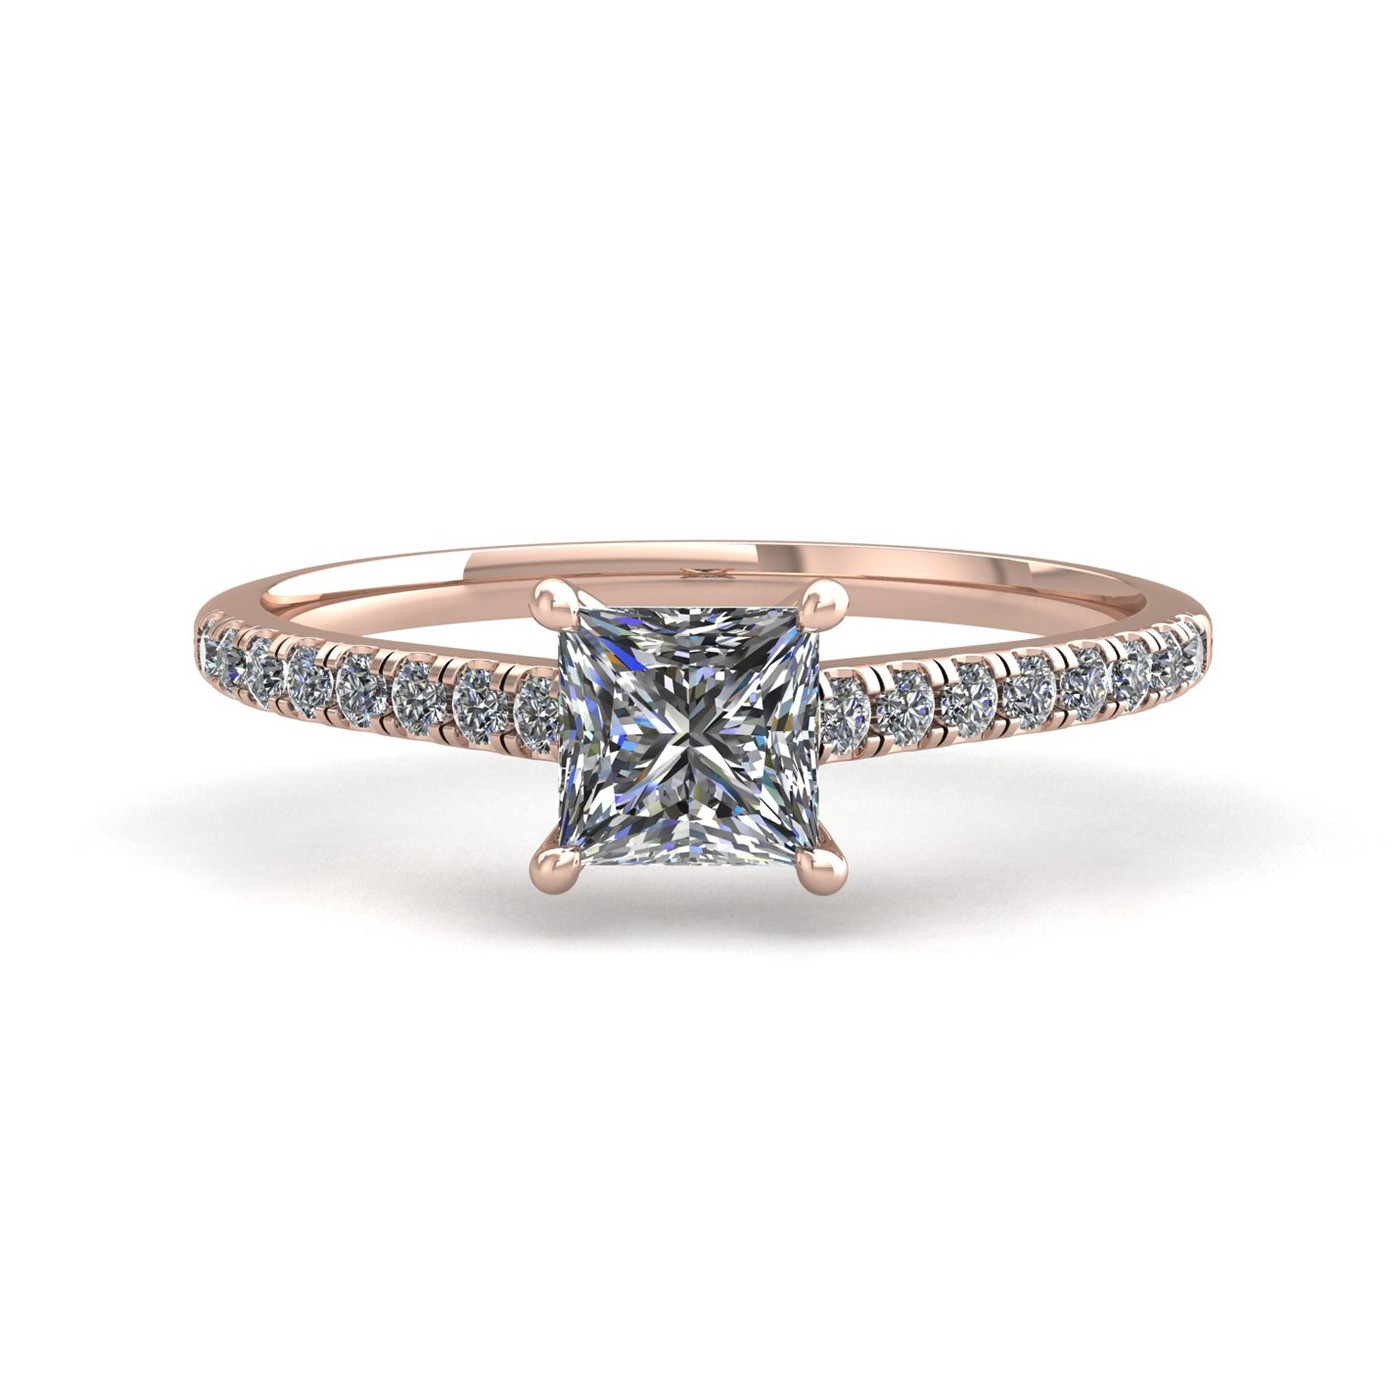 18k rose gold  0,80 ct 4 prongs princess cut diamond engagement ring with whisper thin pavÉ set band Photos & images